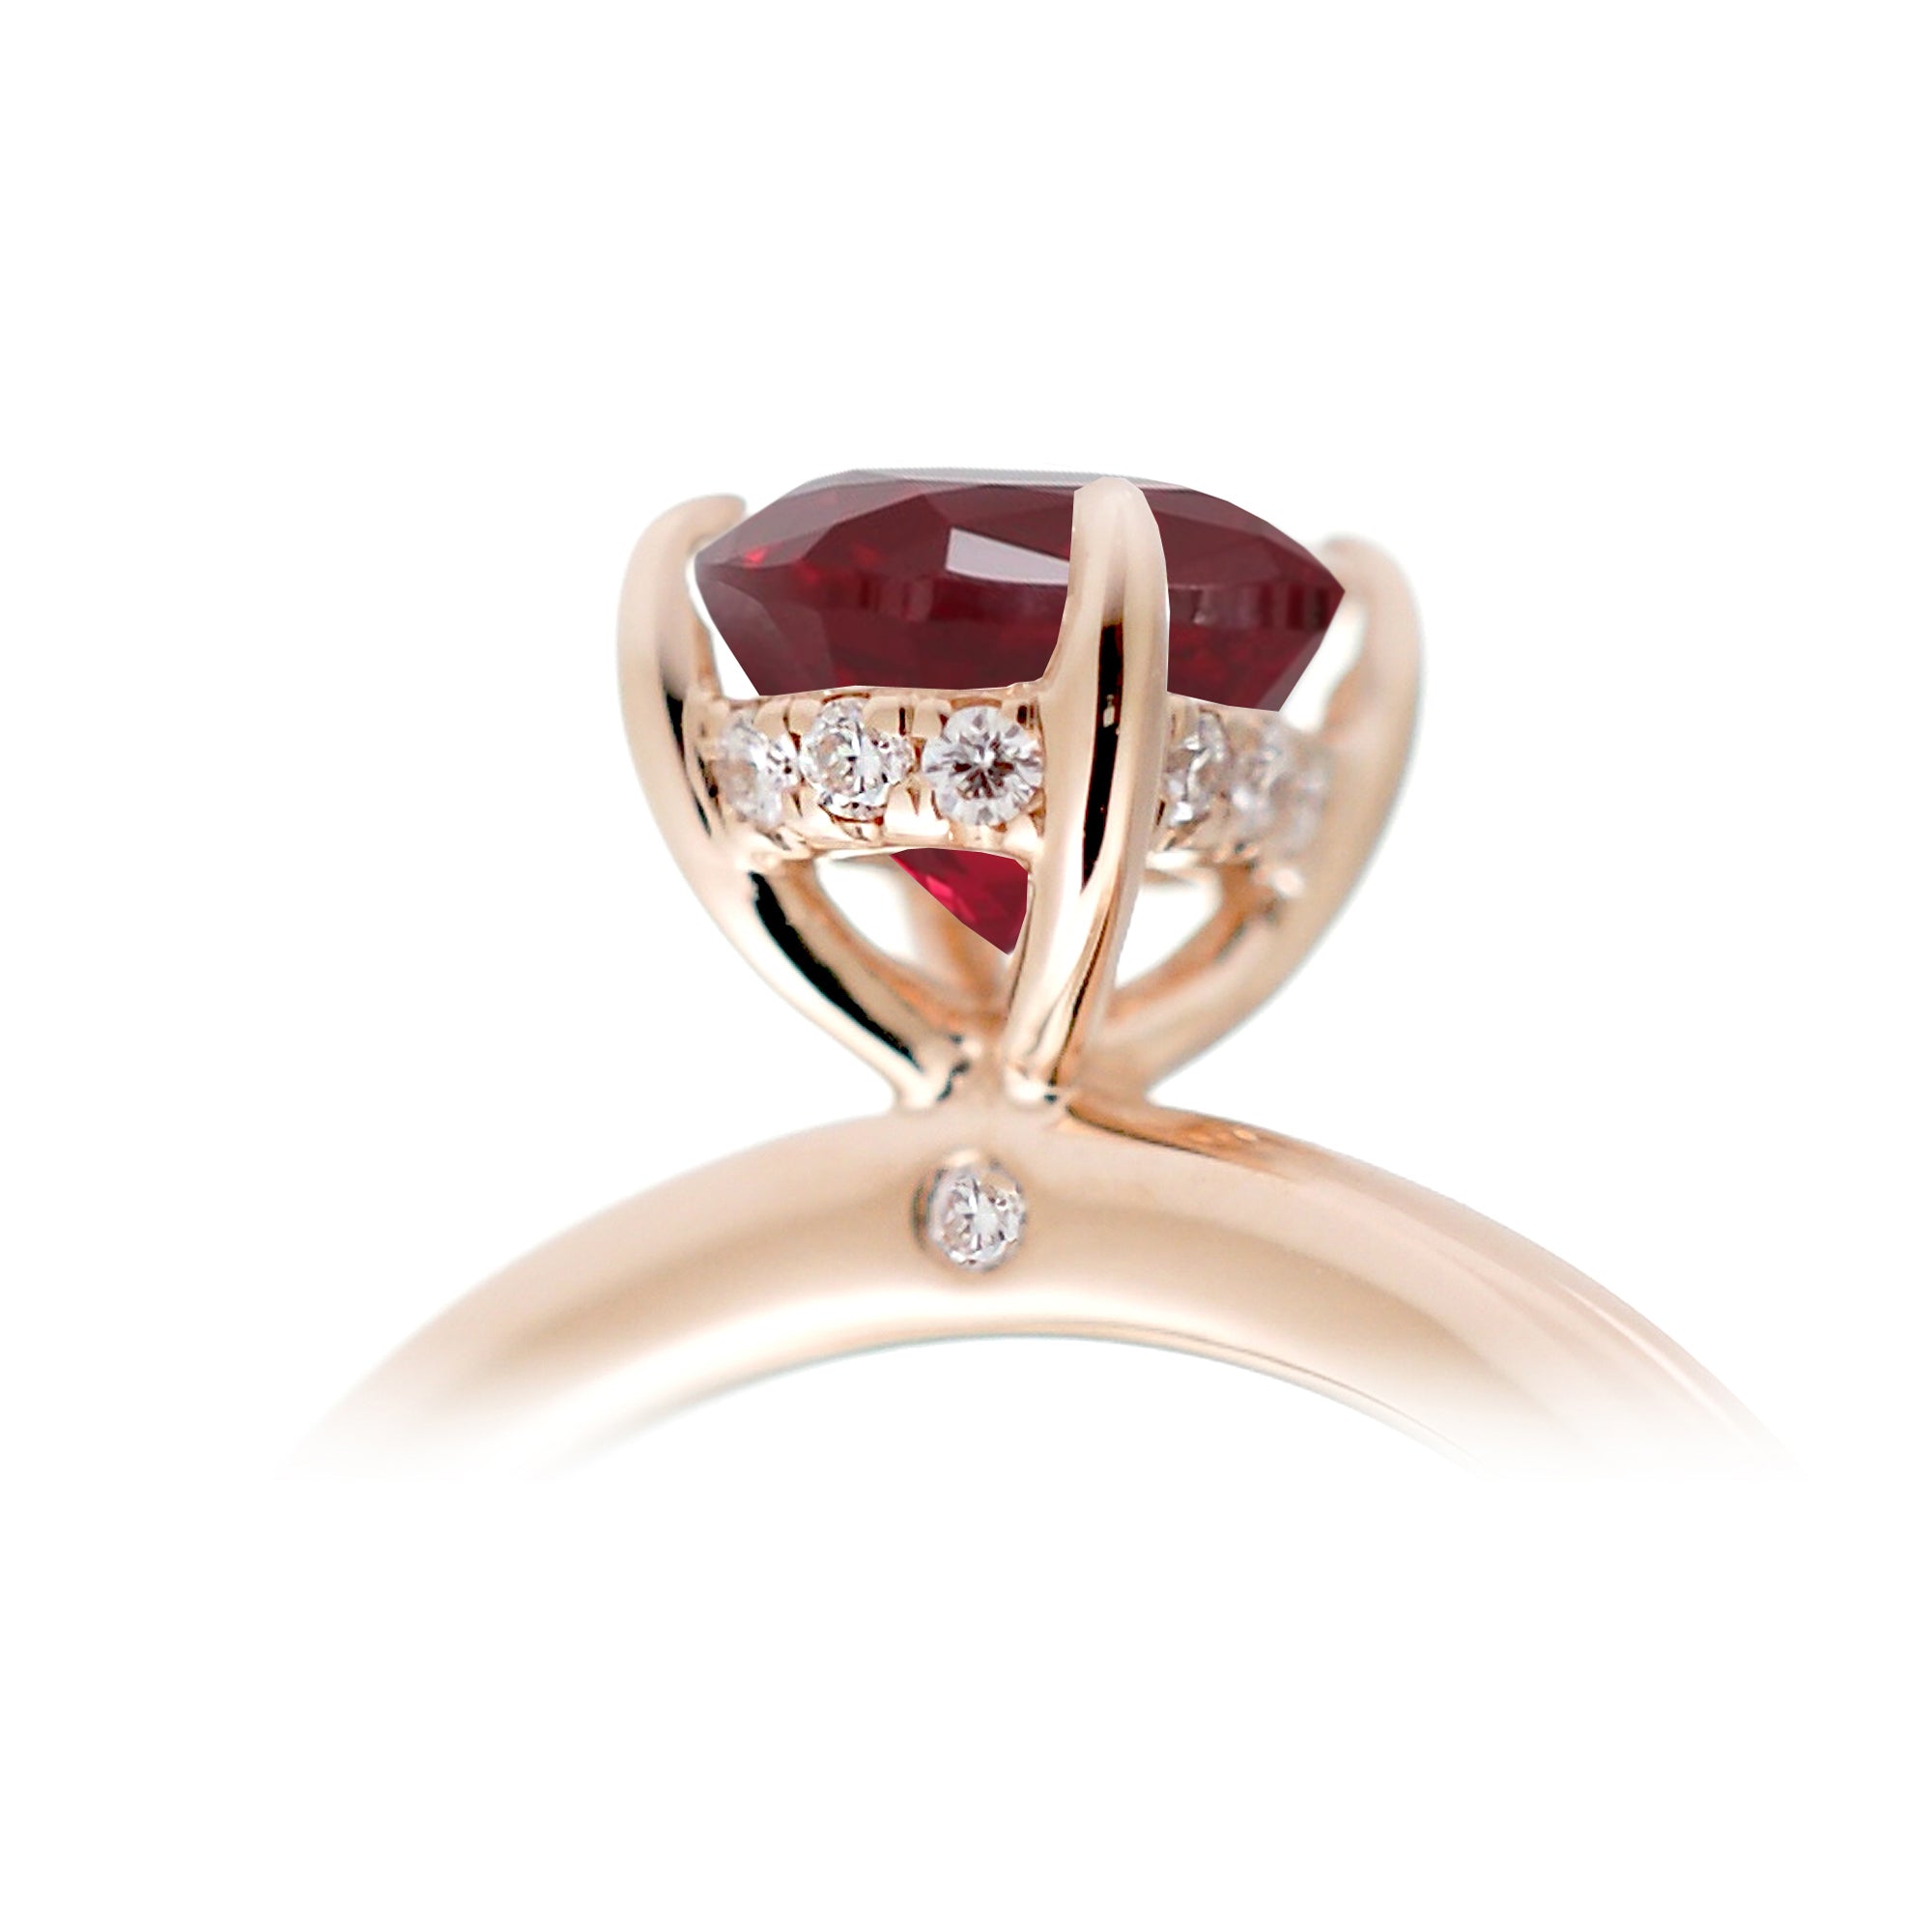 Oval ruby ring diamond hidden halo and solid polish rounded band in rose gold